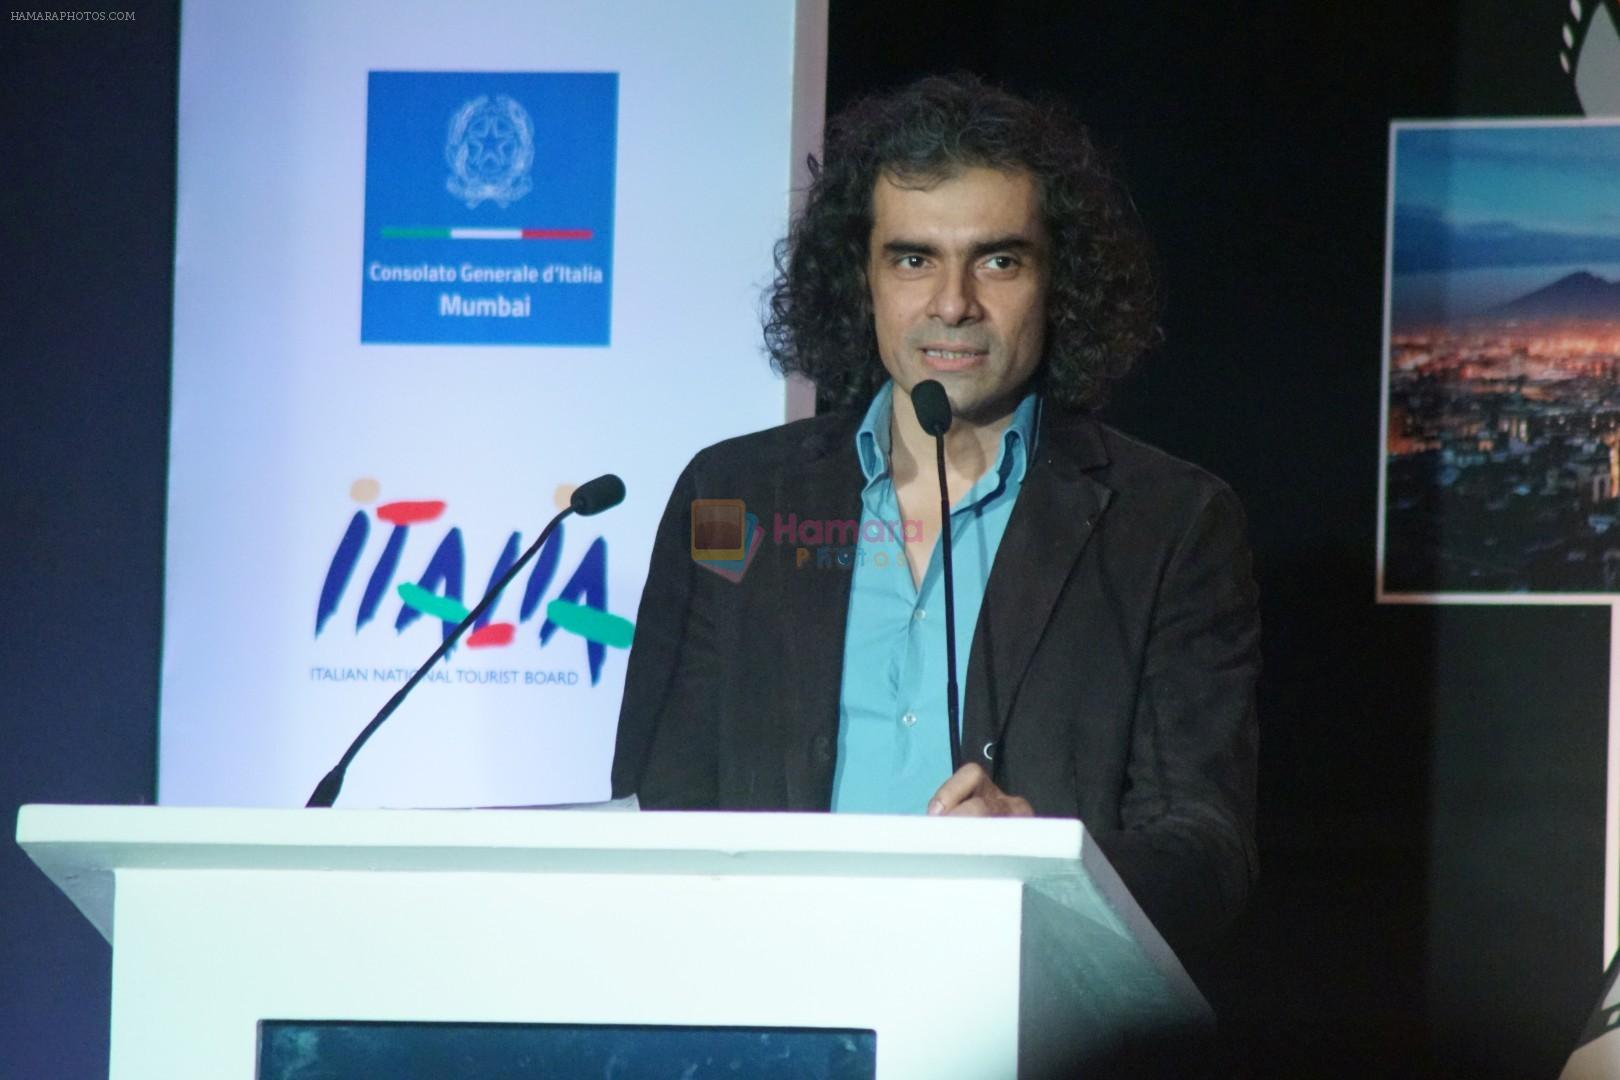 Imtiaz Ali at Red Carpet Of Volare Awards 2018 on 9th Feb 2018